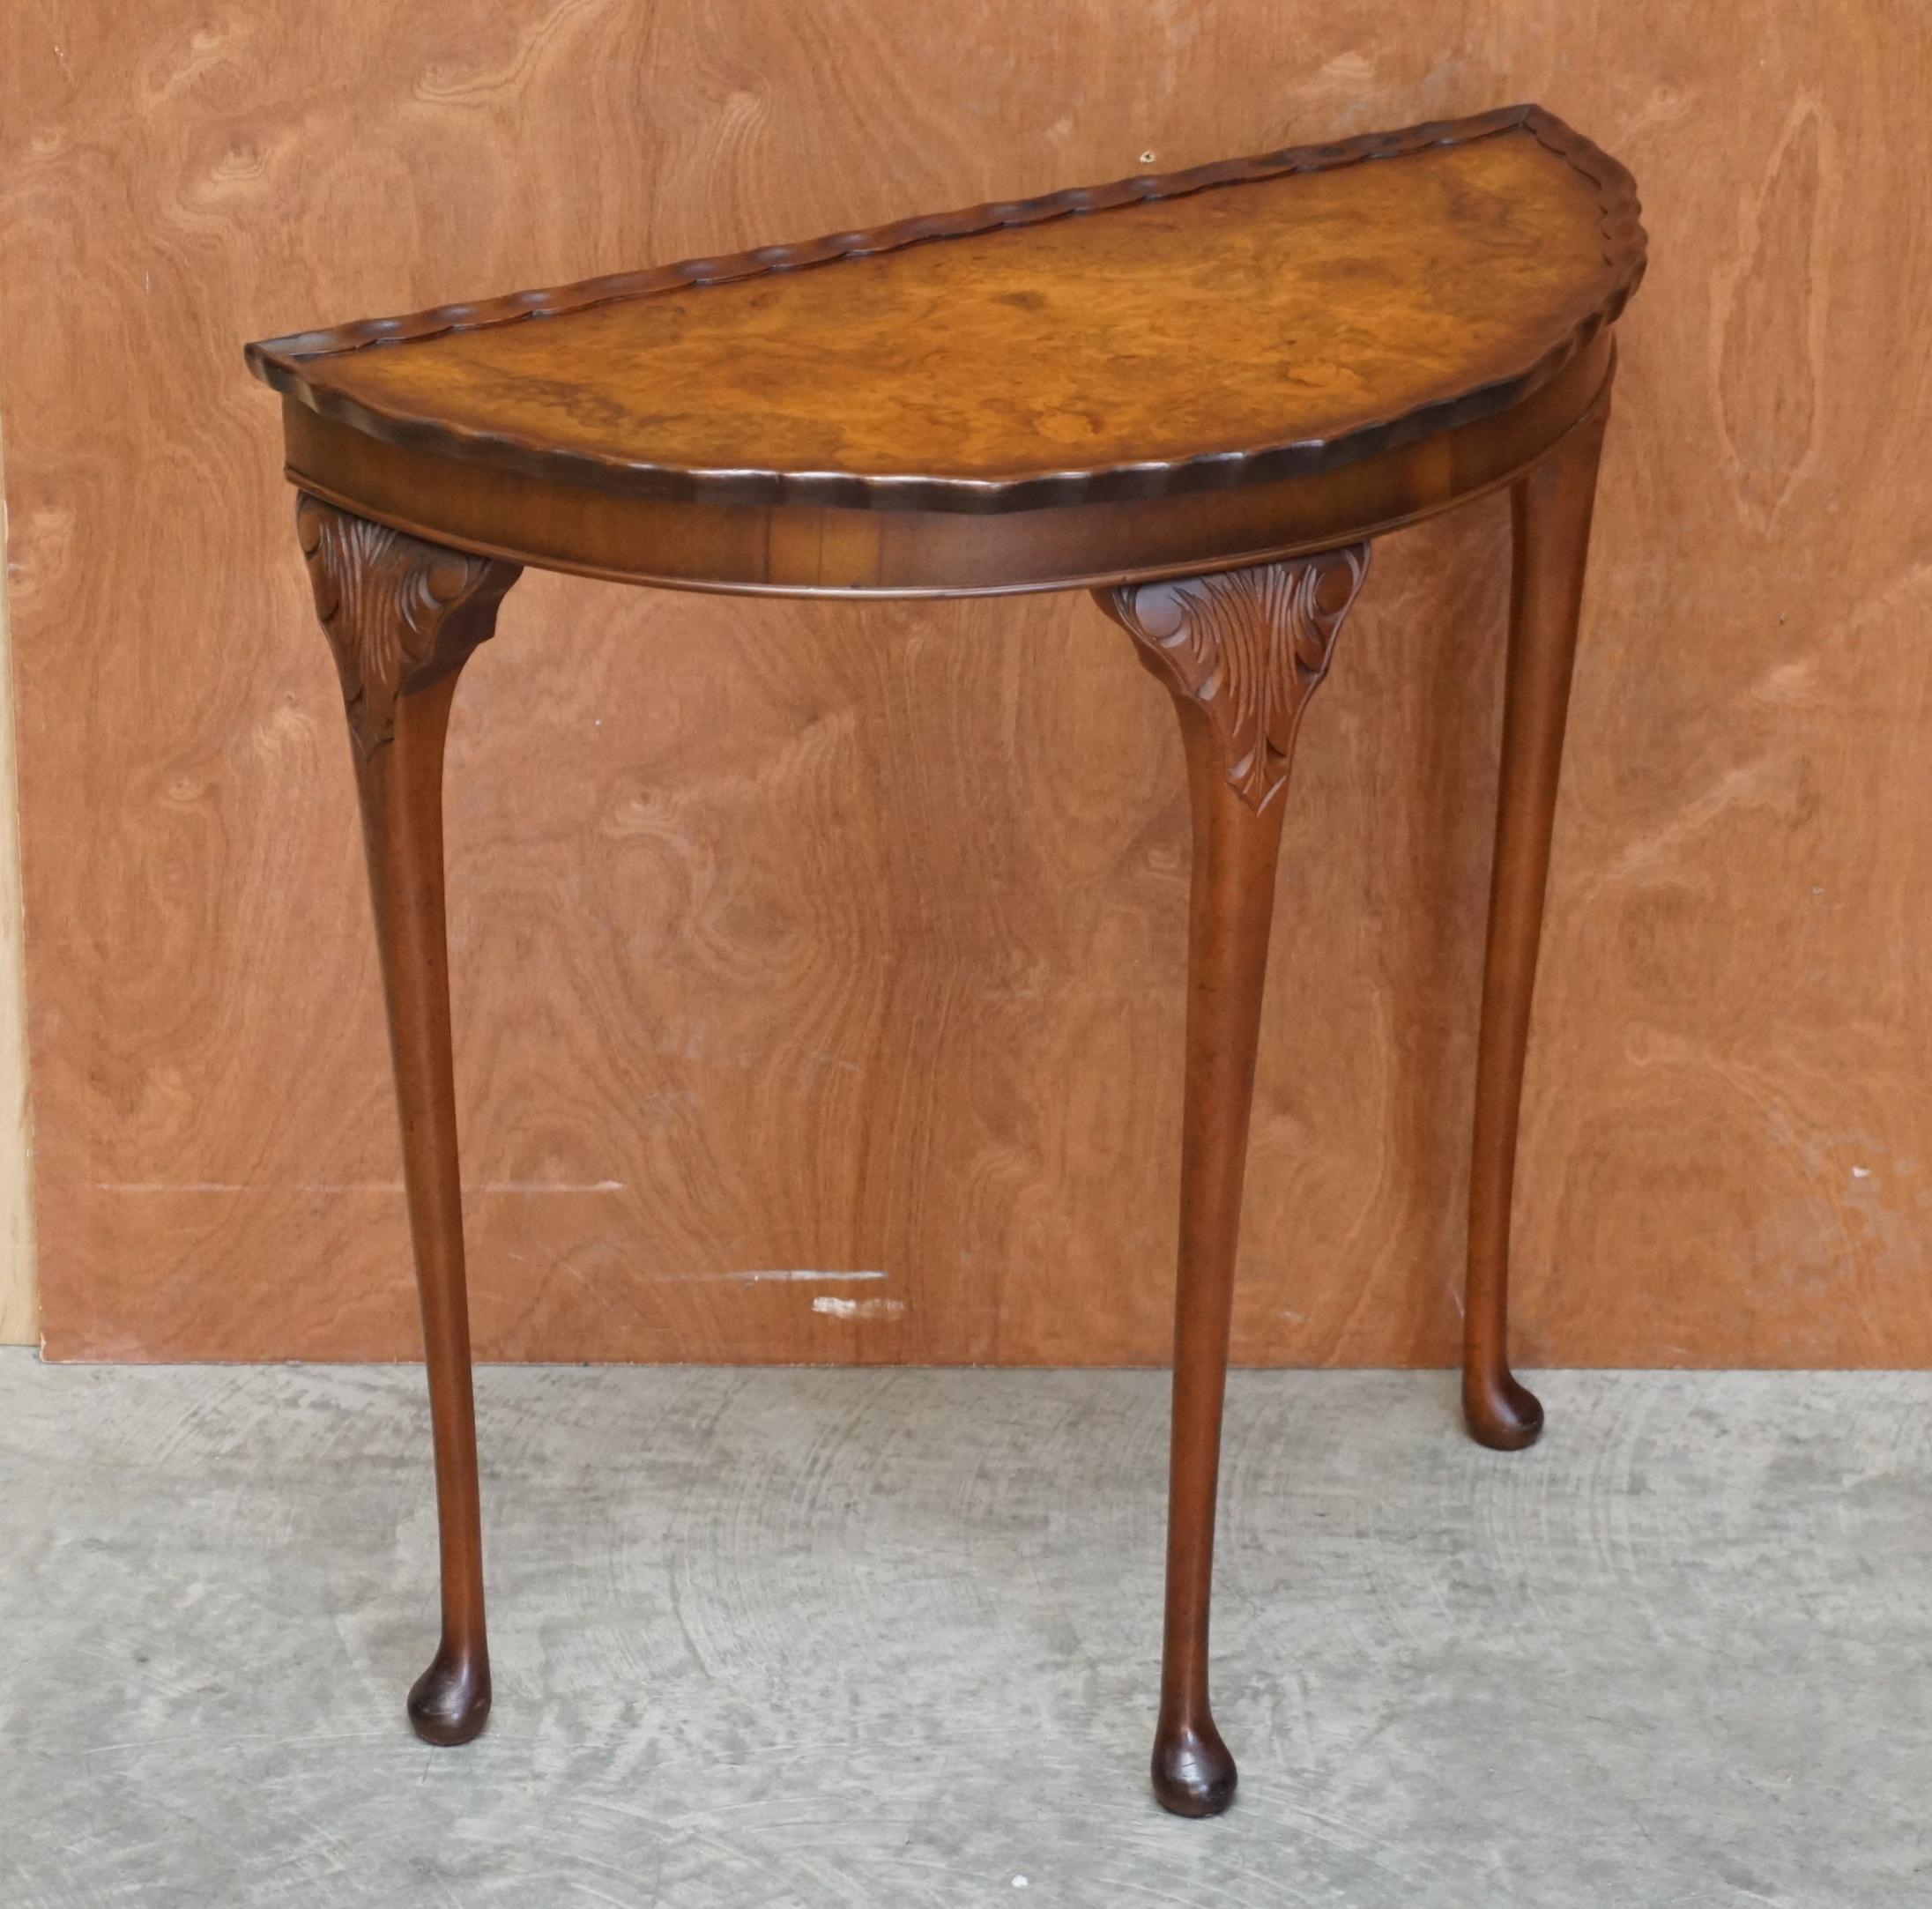 We are delighted to offer for sale this lovely vintage Art Deco style burr walnut demi lune console side table.

A very well made and good-looking piece, it’s very decorative, the burr walnut has a rich warm patina, the scalloped edge is a detail